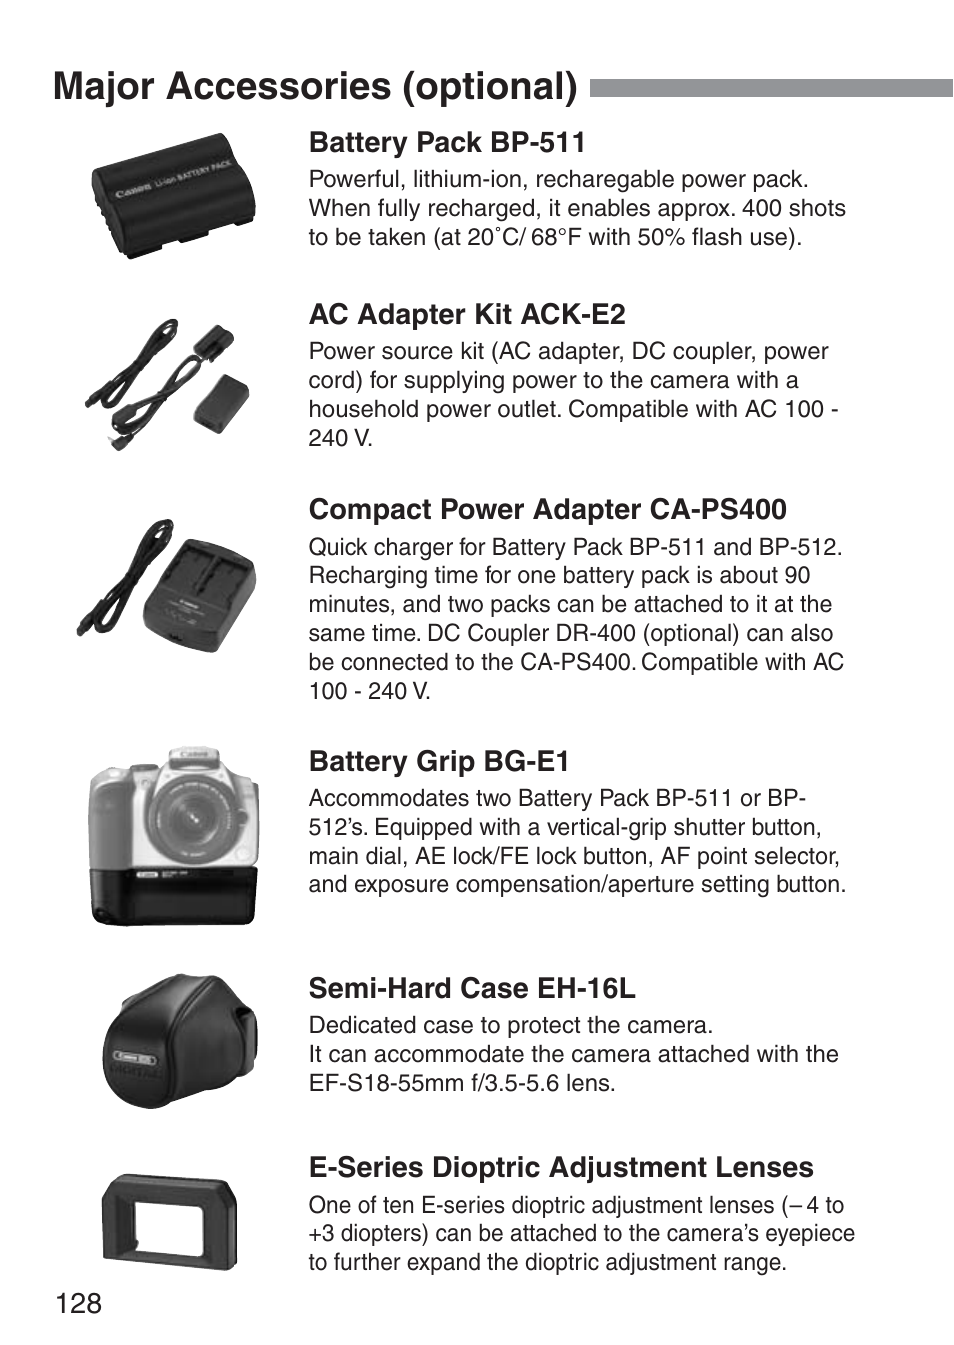 Major accessories (optional) | Canon ds6041 User Manual | Page 128 / 140